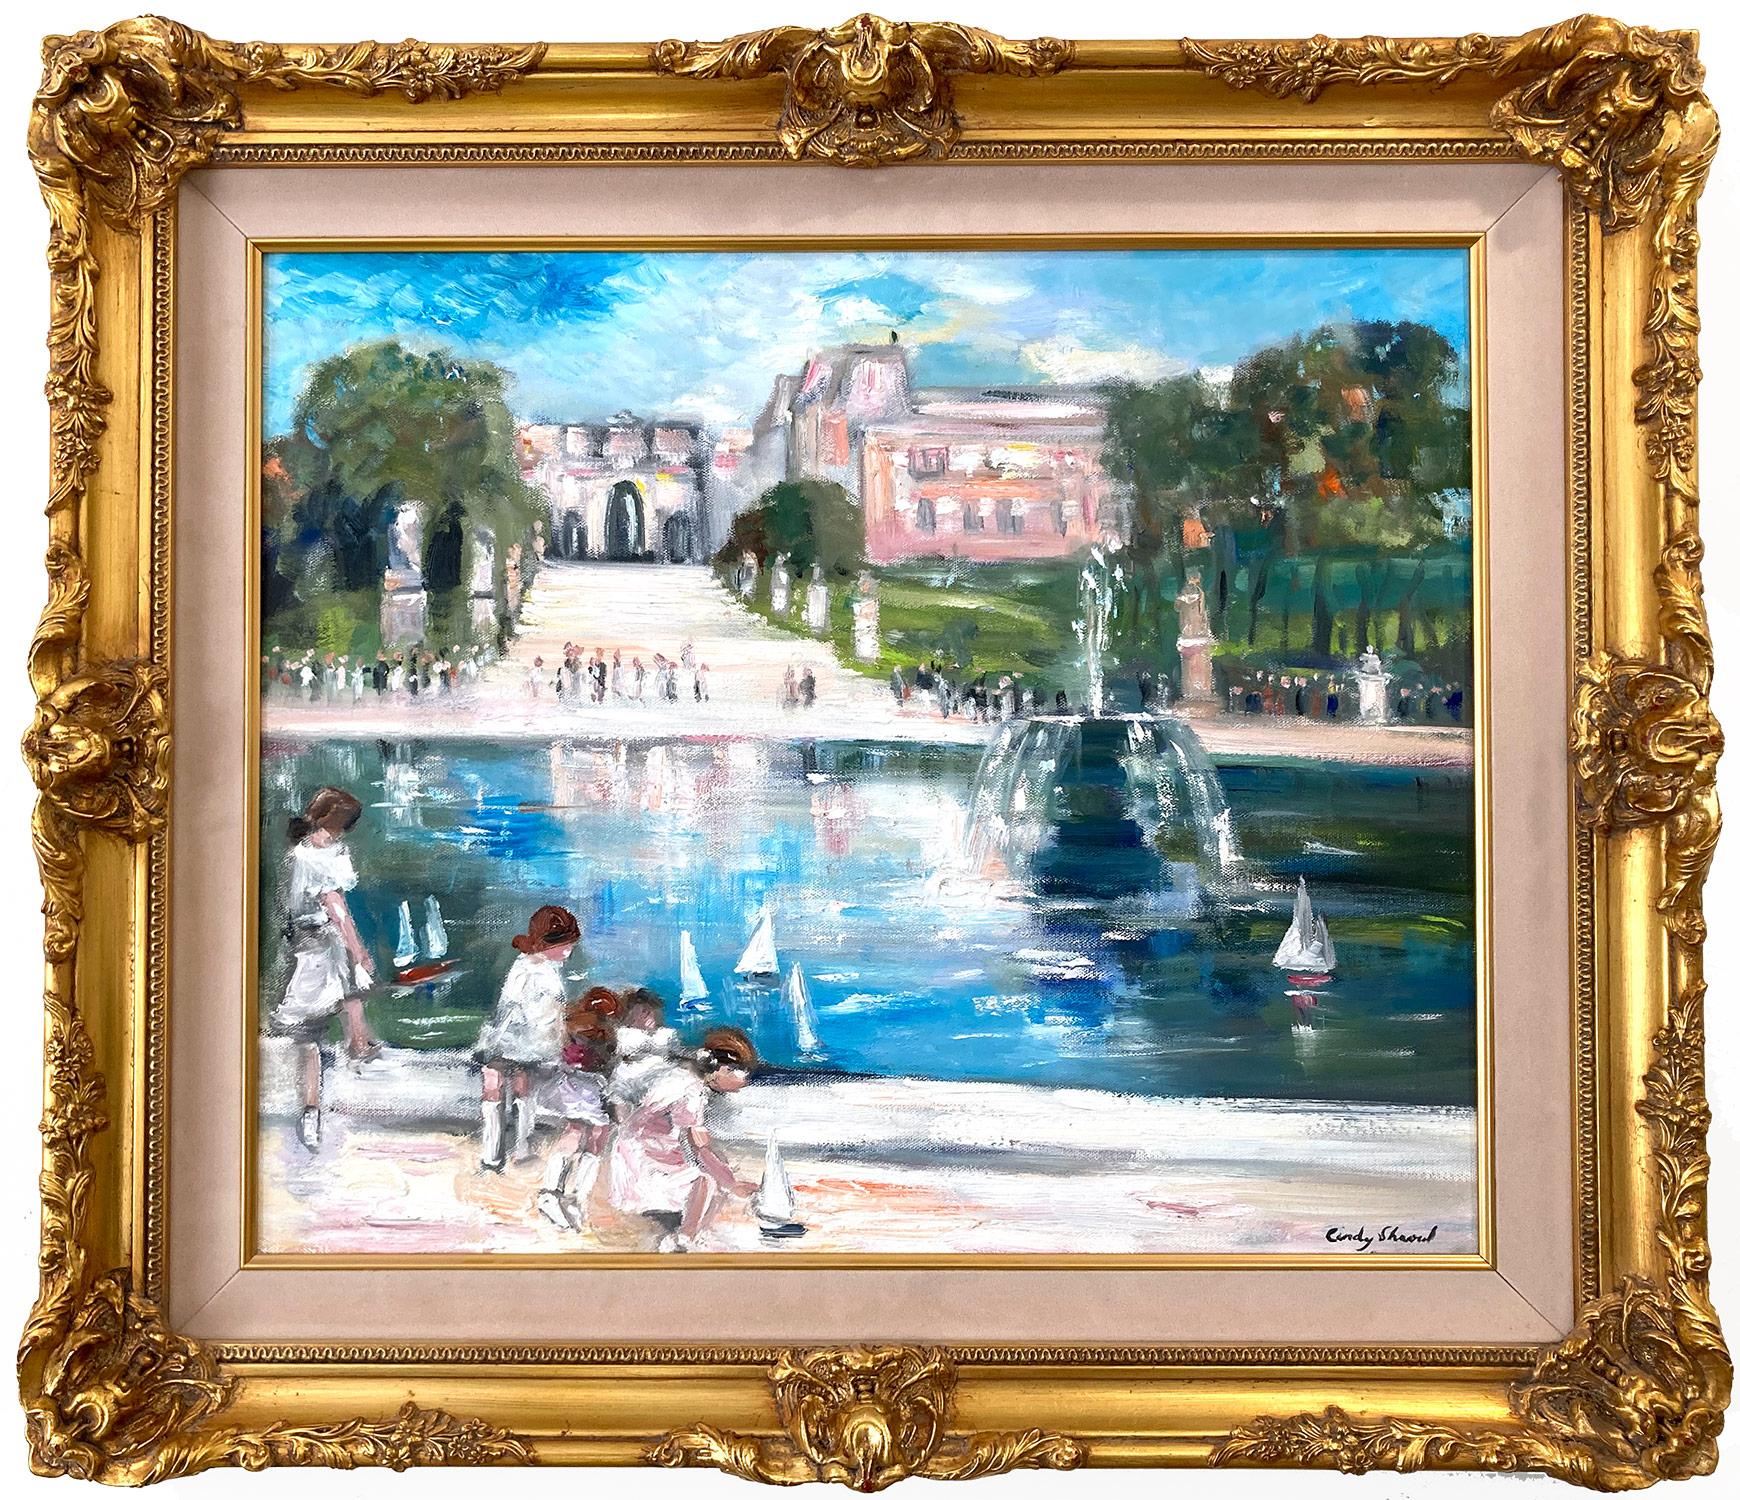 Cindy Shaoul Figurative Painting - "Day at Jardin De Tuileries" Impressionistic Park Scene style of Jules Herve